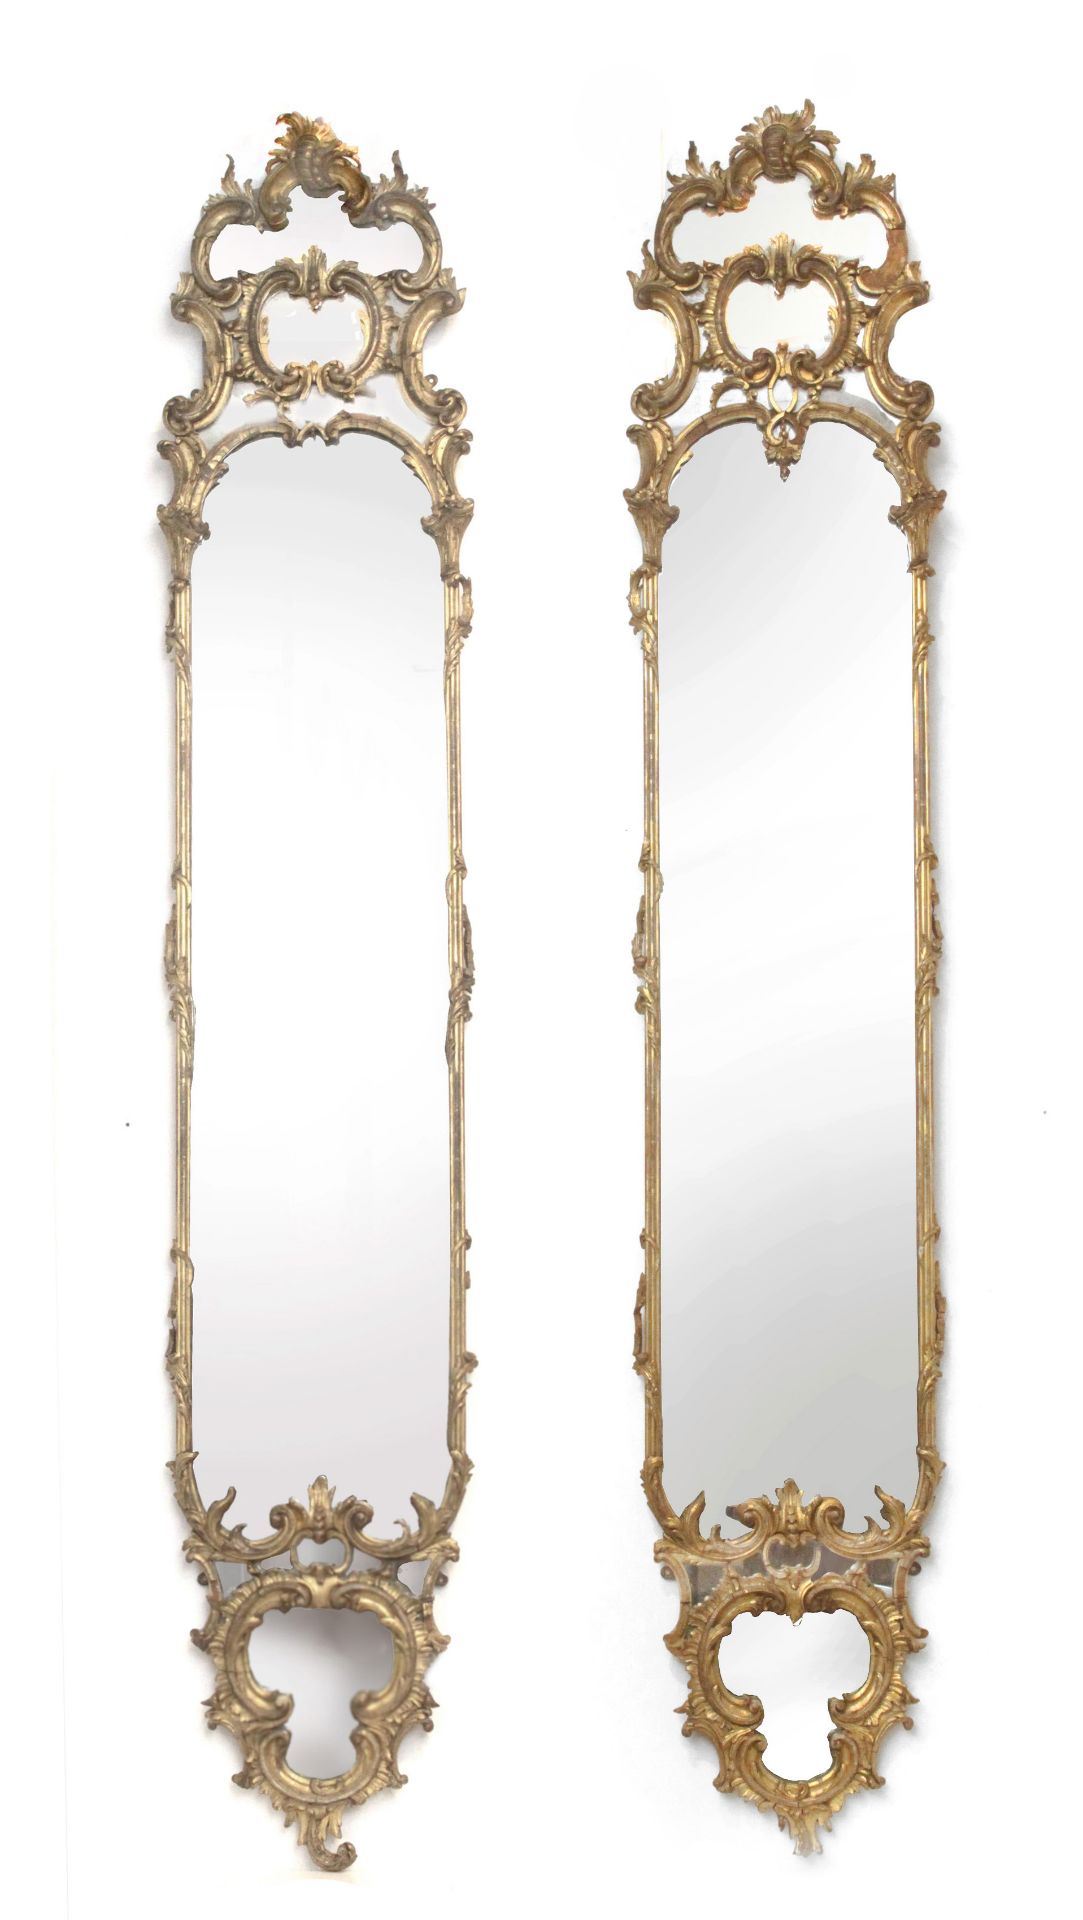 A pair of mid 18th century Louis XV period mirrors